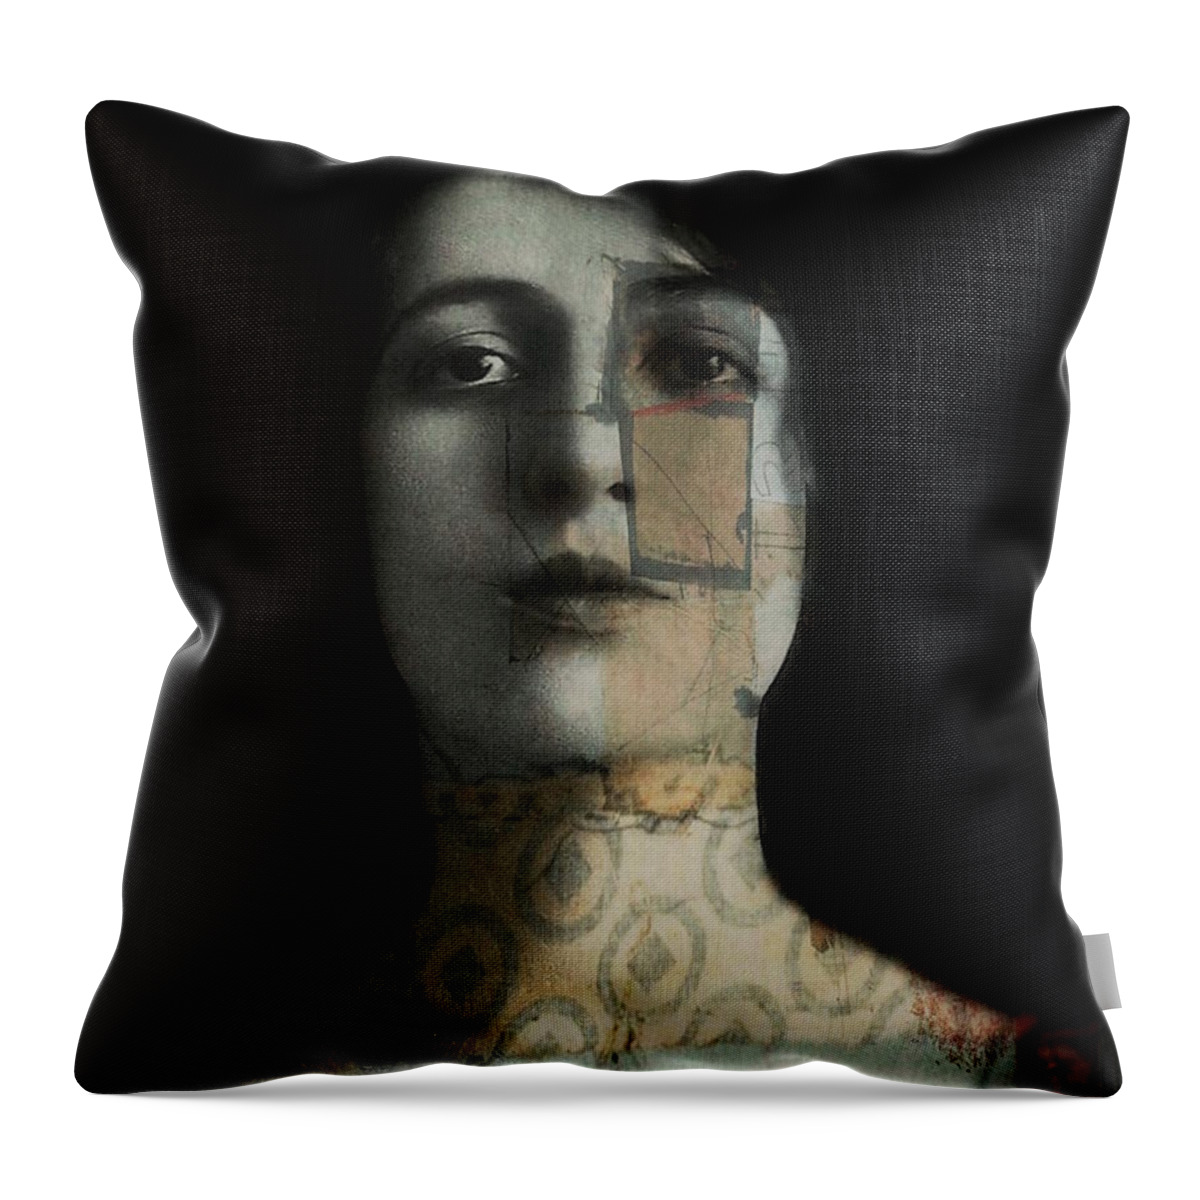 Elena Sangro Throw Pillow featuring the mixed media These Are The Days by Paul Lovering